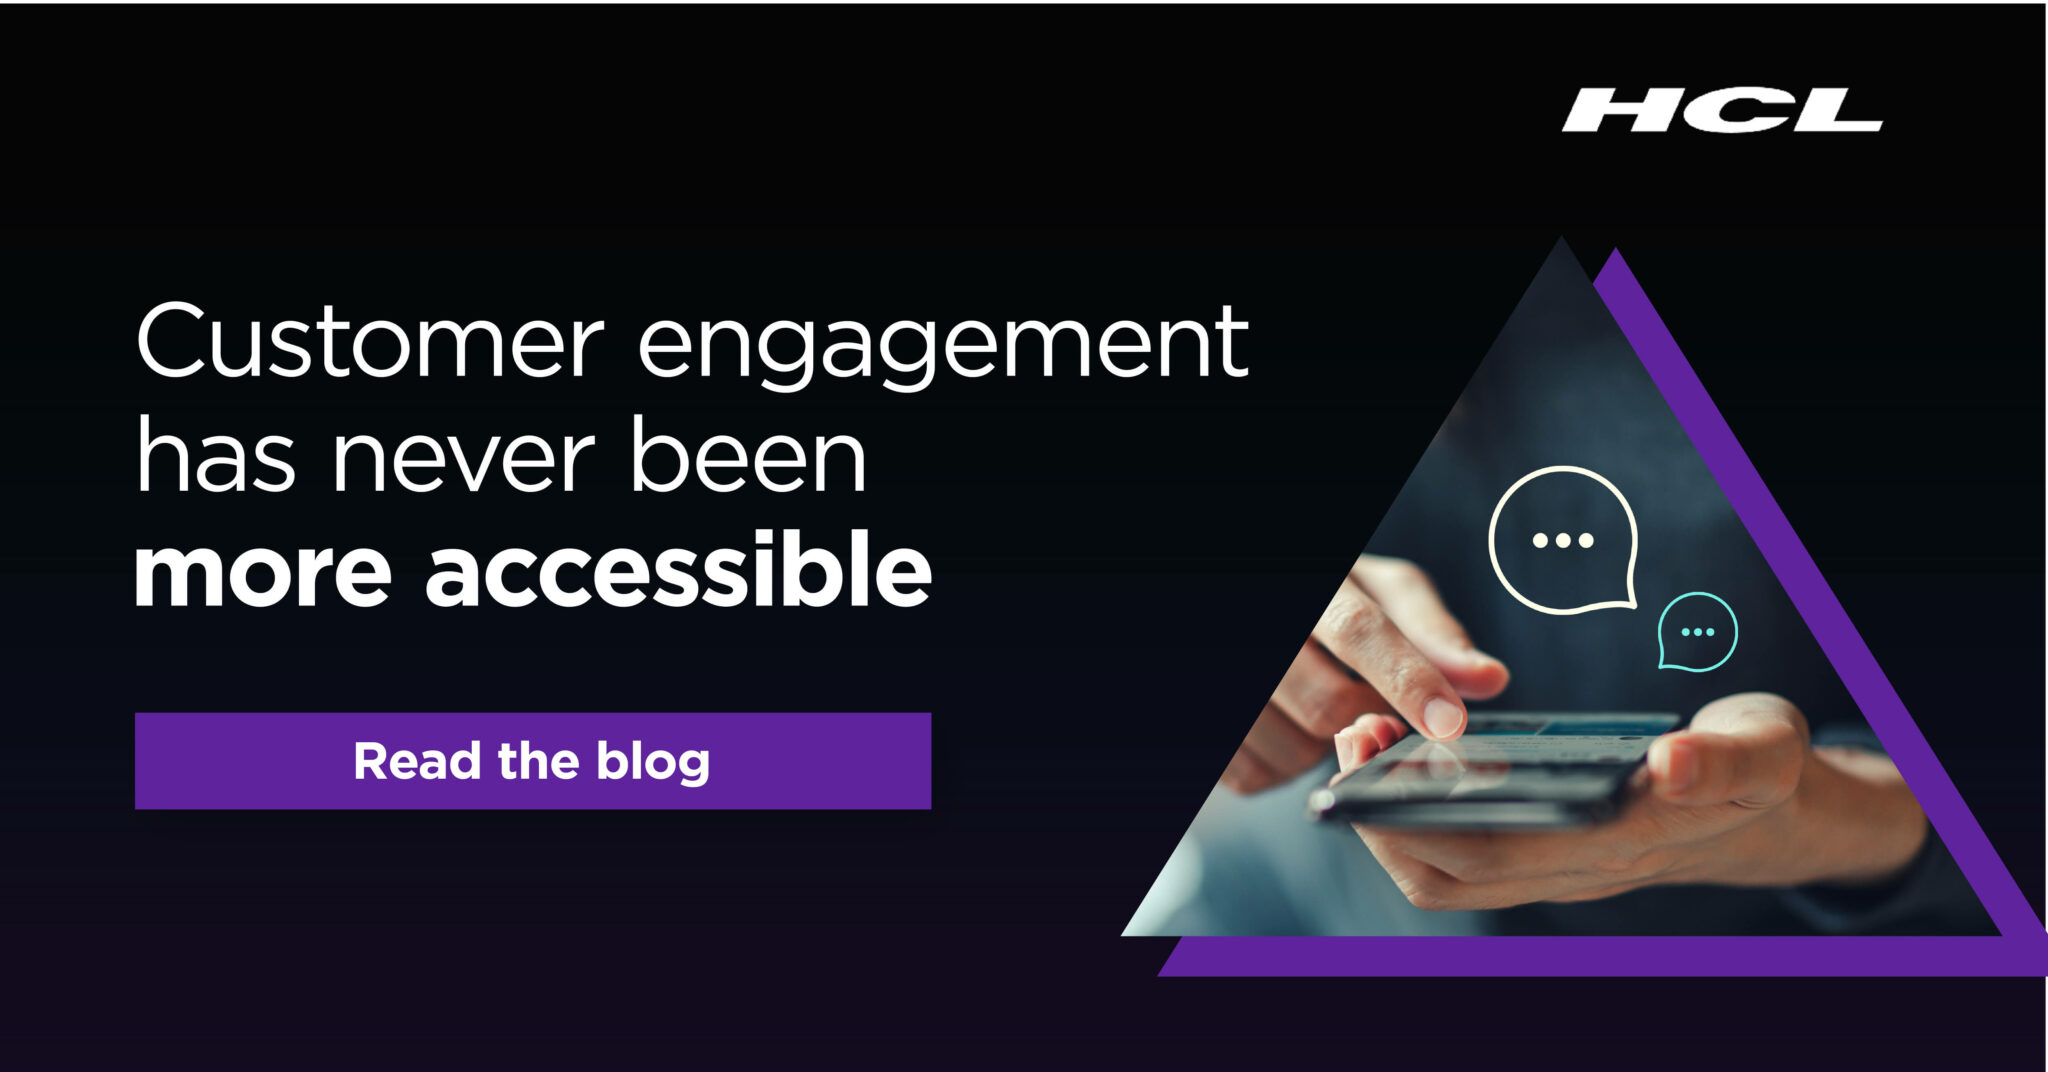 Effective Customer Engagement Has Never Been More Accessible, Easier, or More Nuanced